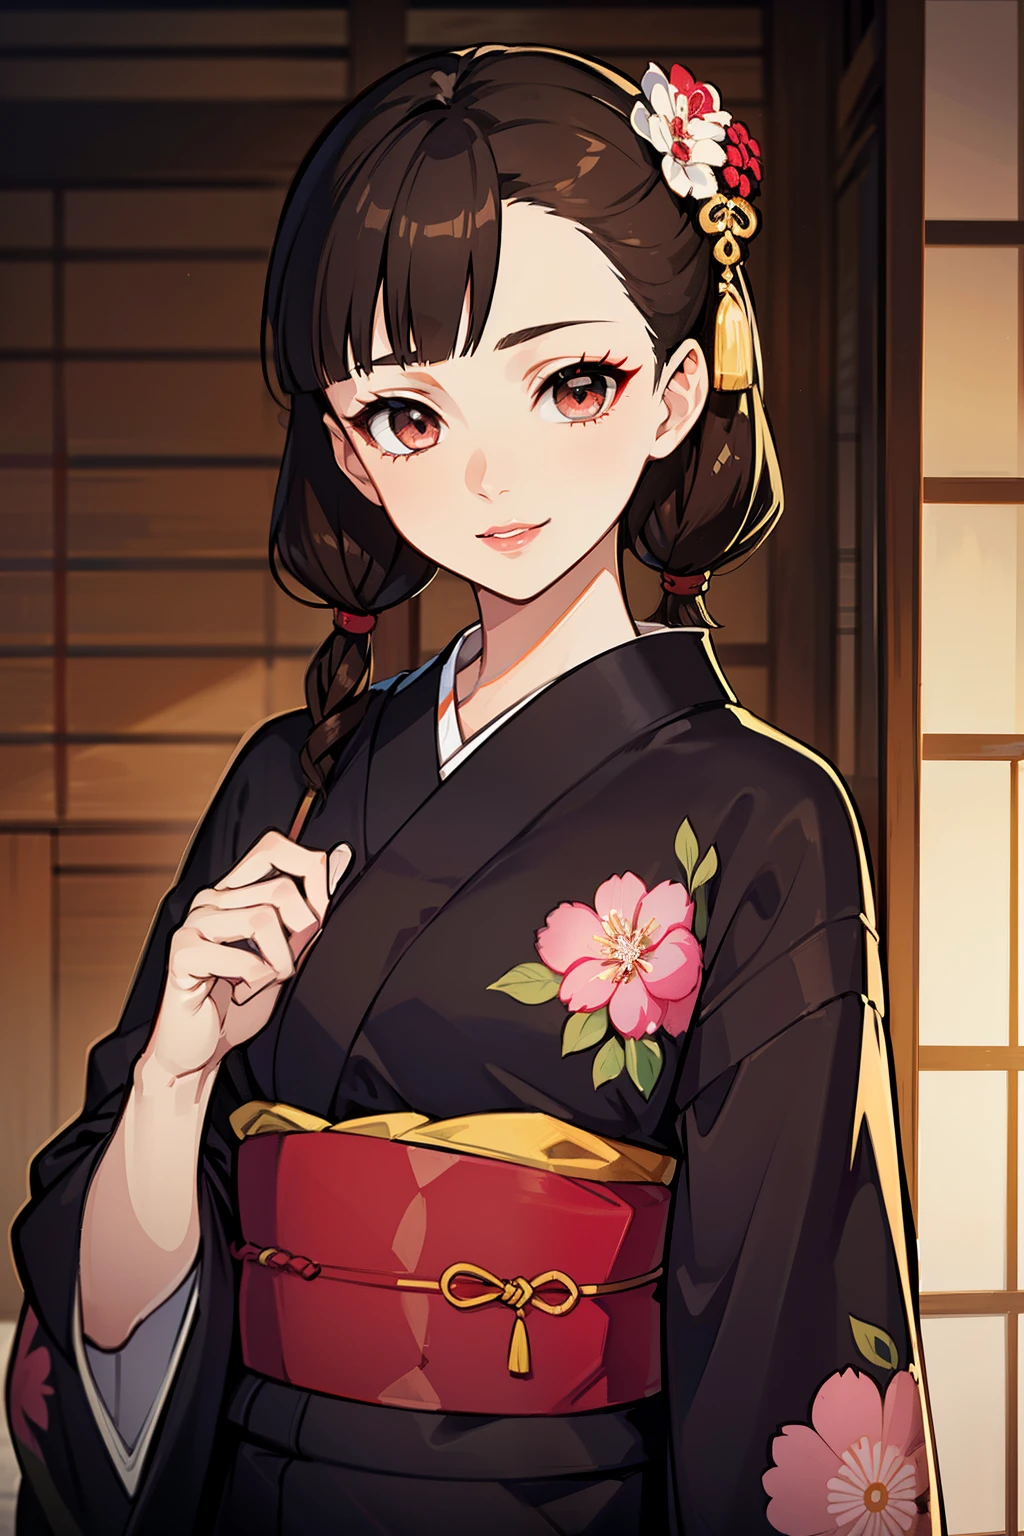 (high-quality, breathtaking),(expressive eyes, perfect face) (((yukata, sexy lips)), 1girl, female, solo, young adult, brown hair, black coloured eyes, stylised hair, gentle smile, short length hair, loose hair, side bangs, tied up, japanese clothing, elegant, soft make up, hair pin accessory in hair, pigtails, demon slayer art style